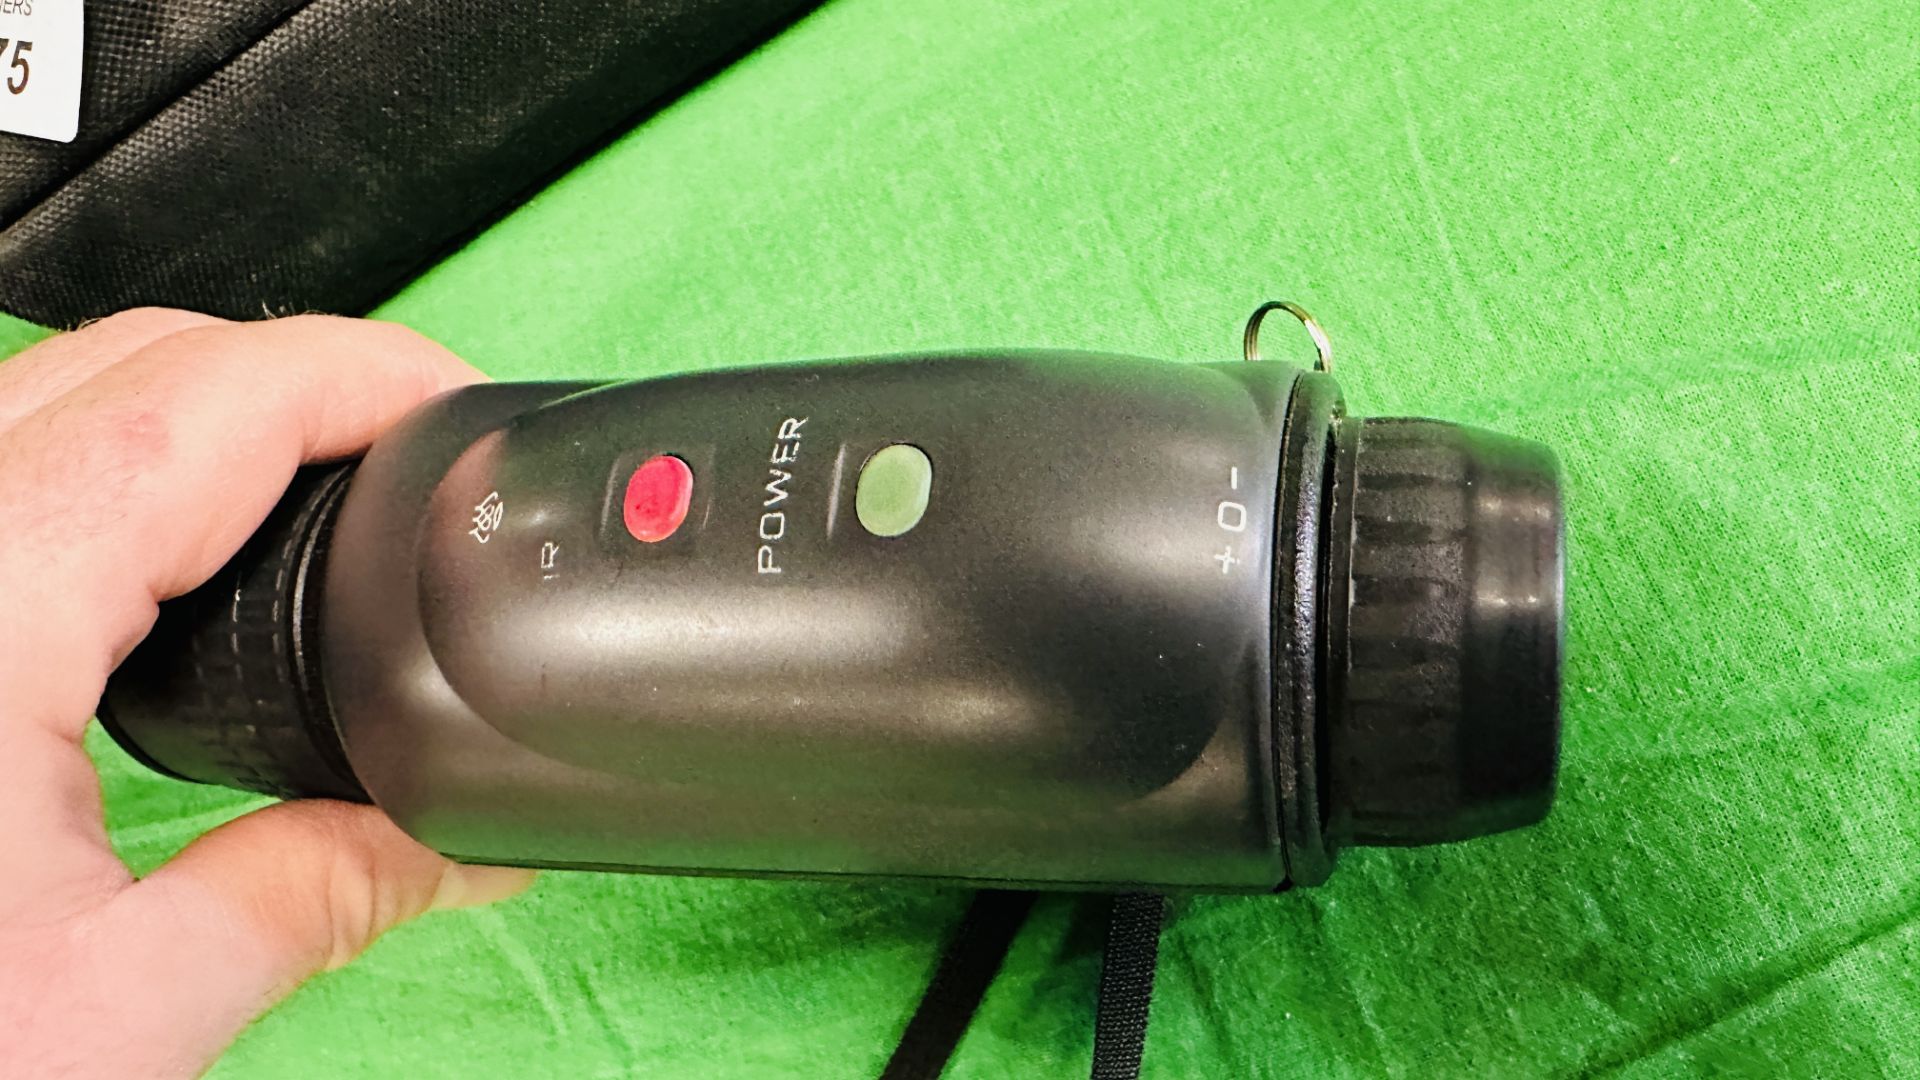 A NEWCON NIGHT VISION SCOPE IN CASE. - Image 5 of 5